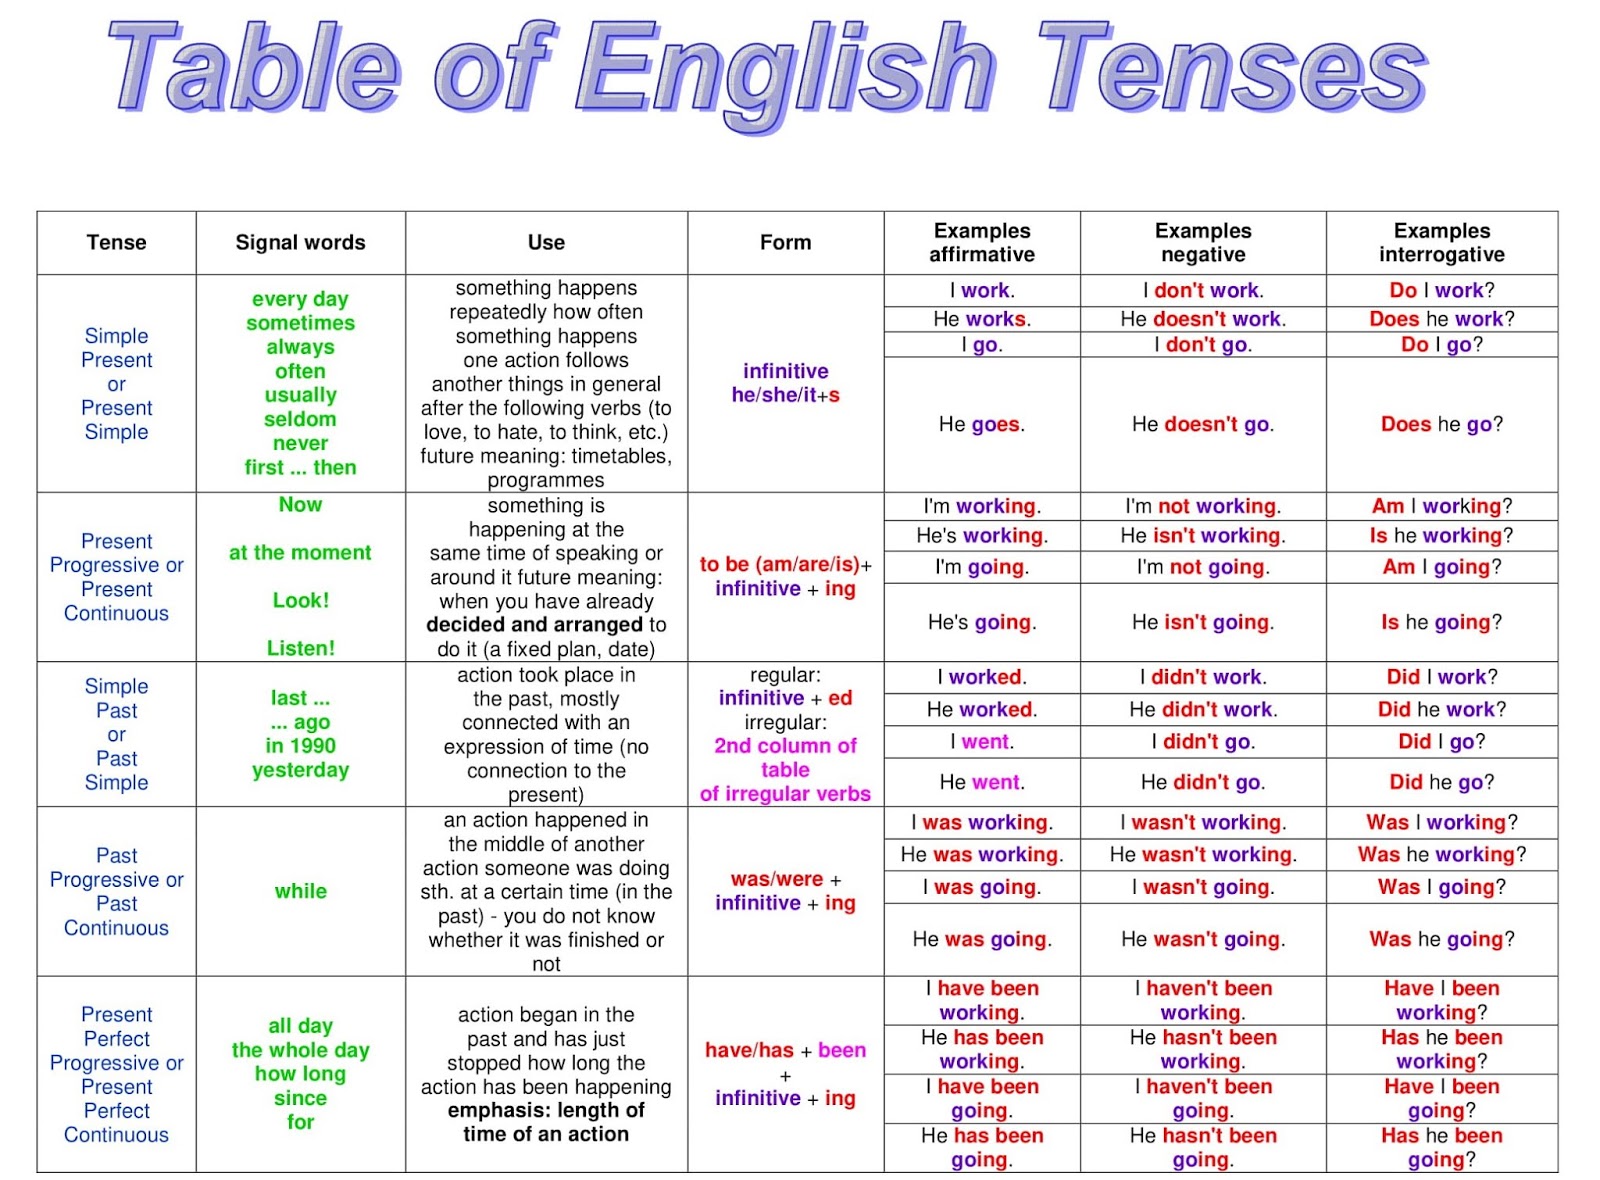 English Grammar A To Z: Table of English Tenses with example